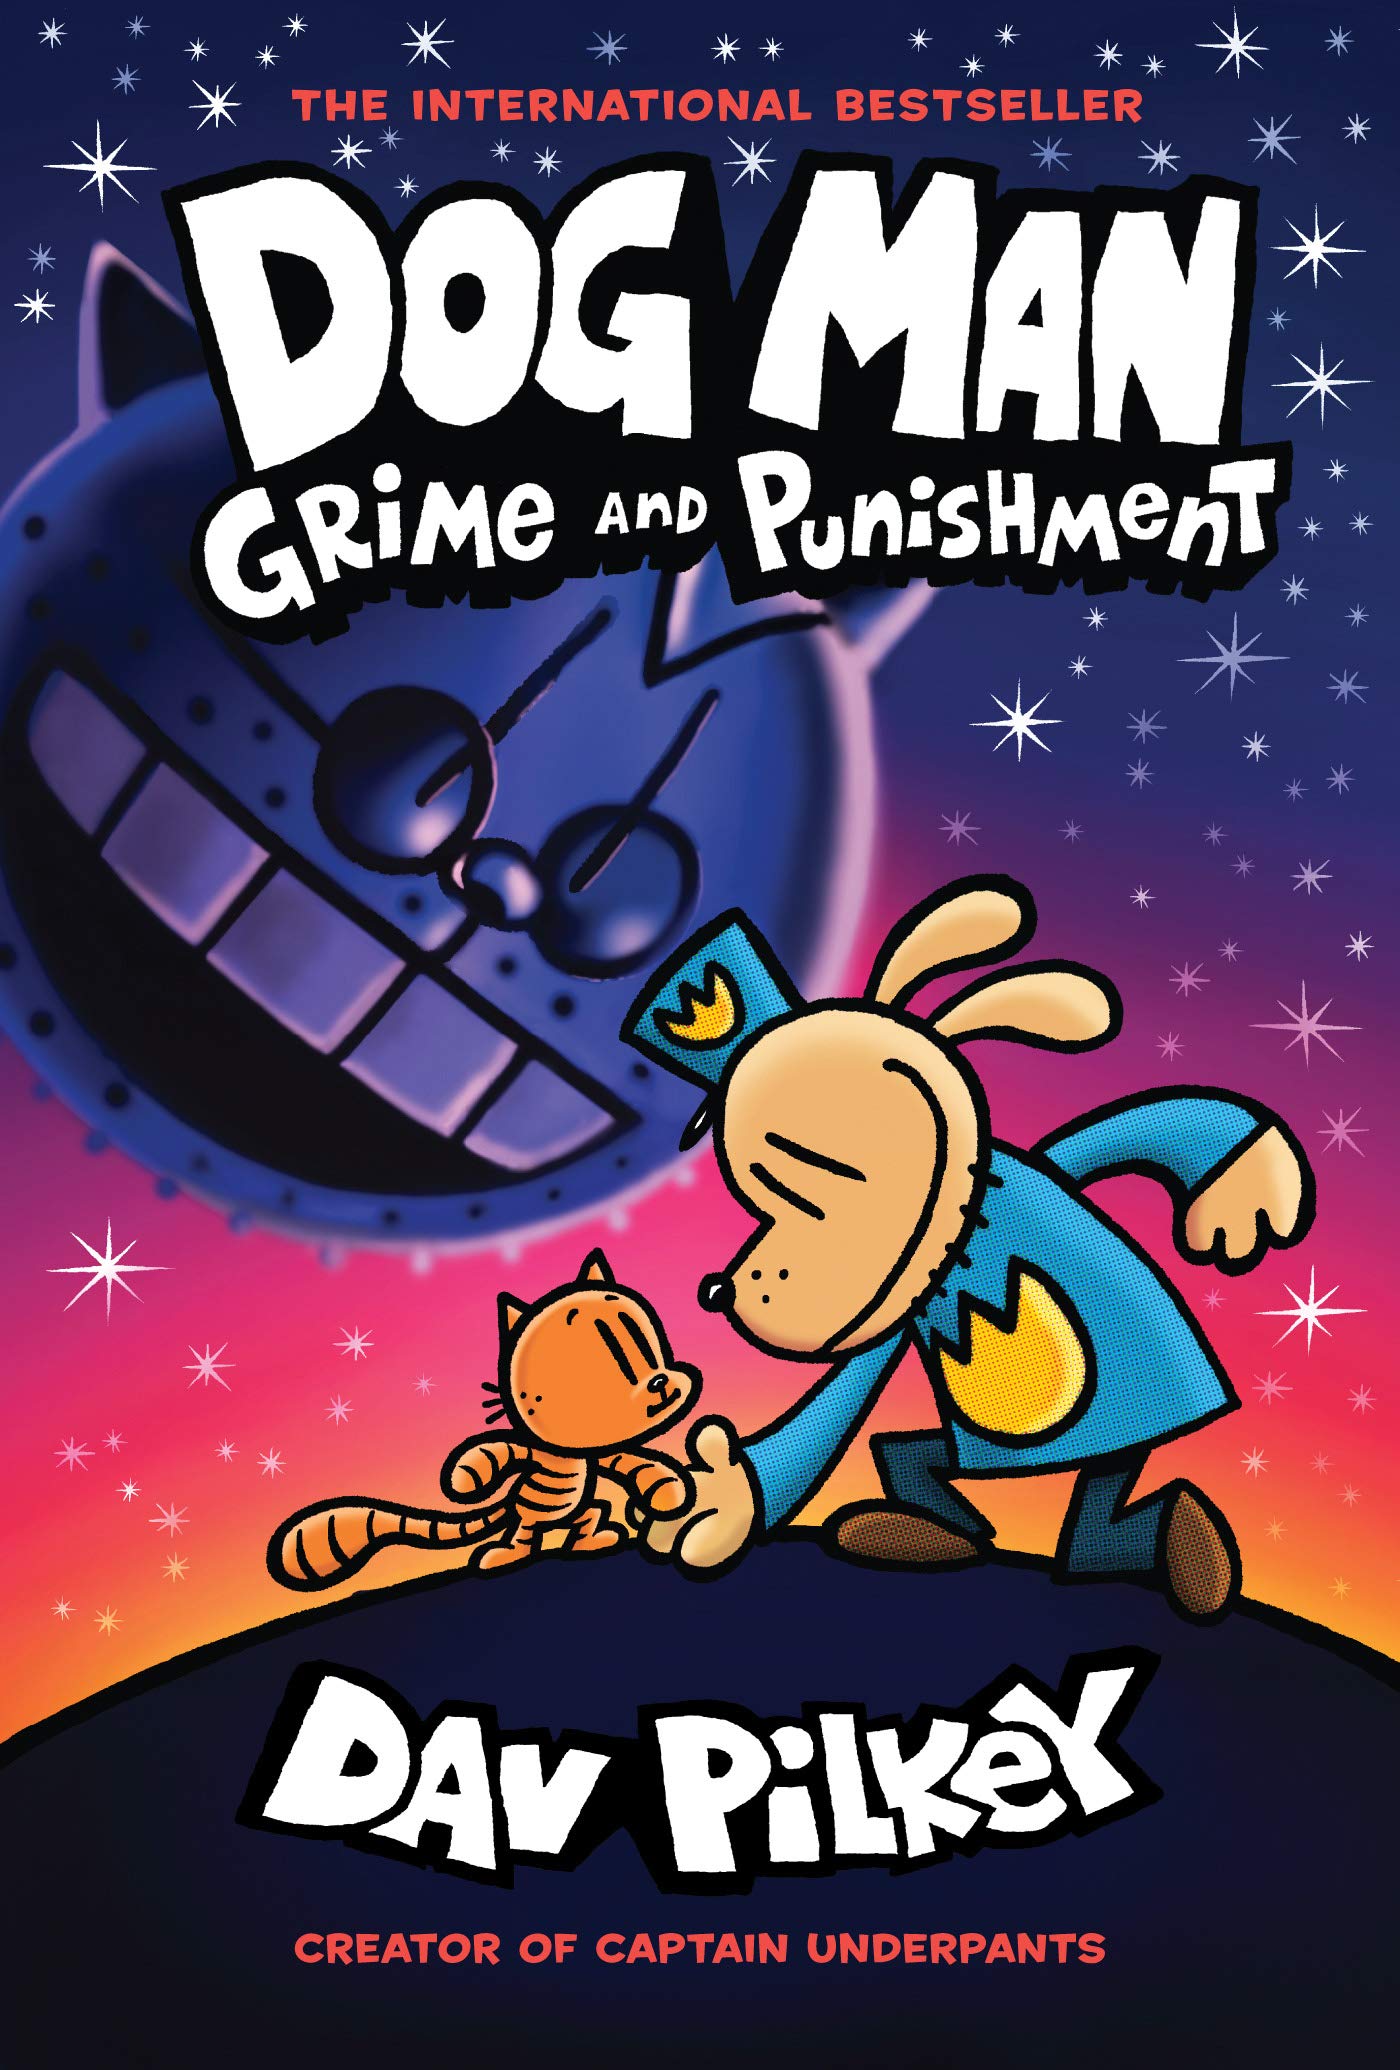 Dog Man: Grime and Punishment: A Graphic Novel (Dog Man #9): From the Creator of Captain Underpants: Volume 9 by Pilkey, Dav